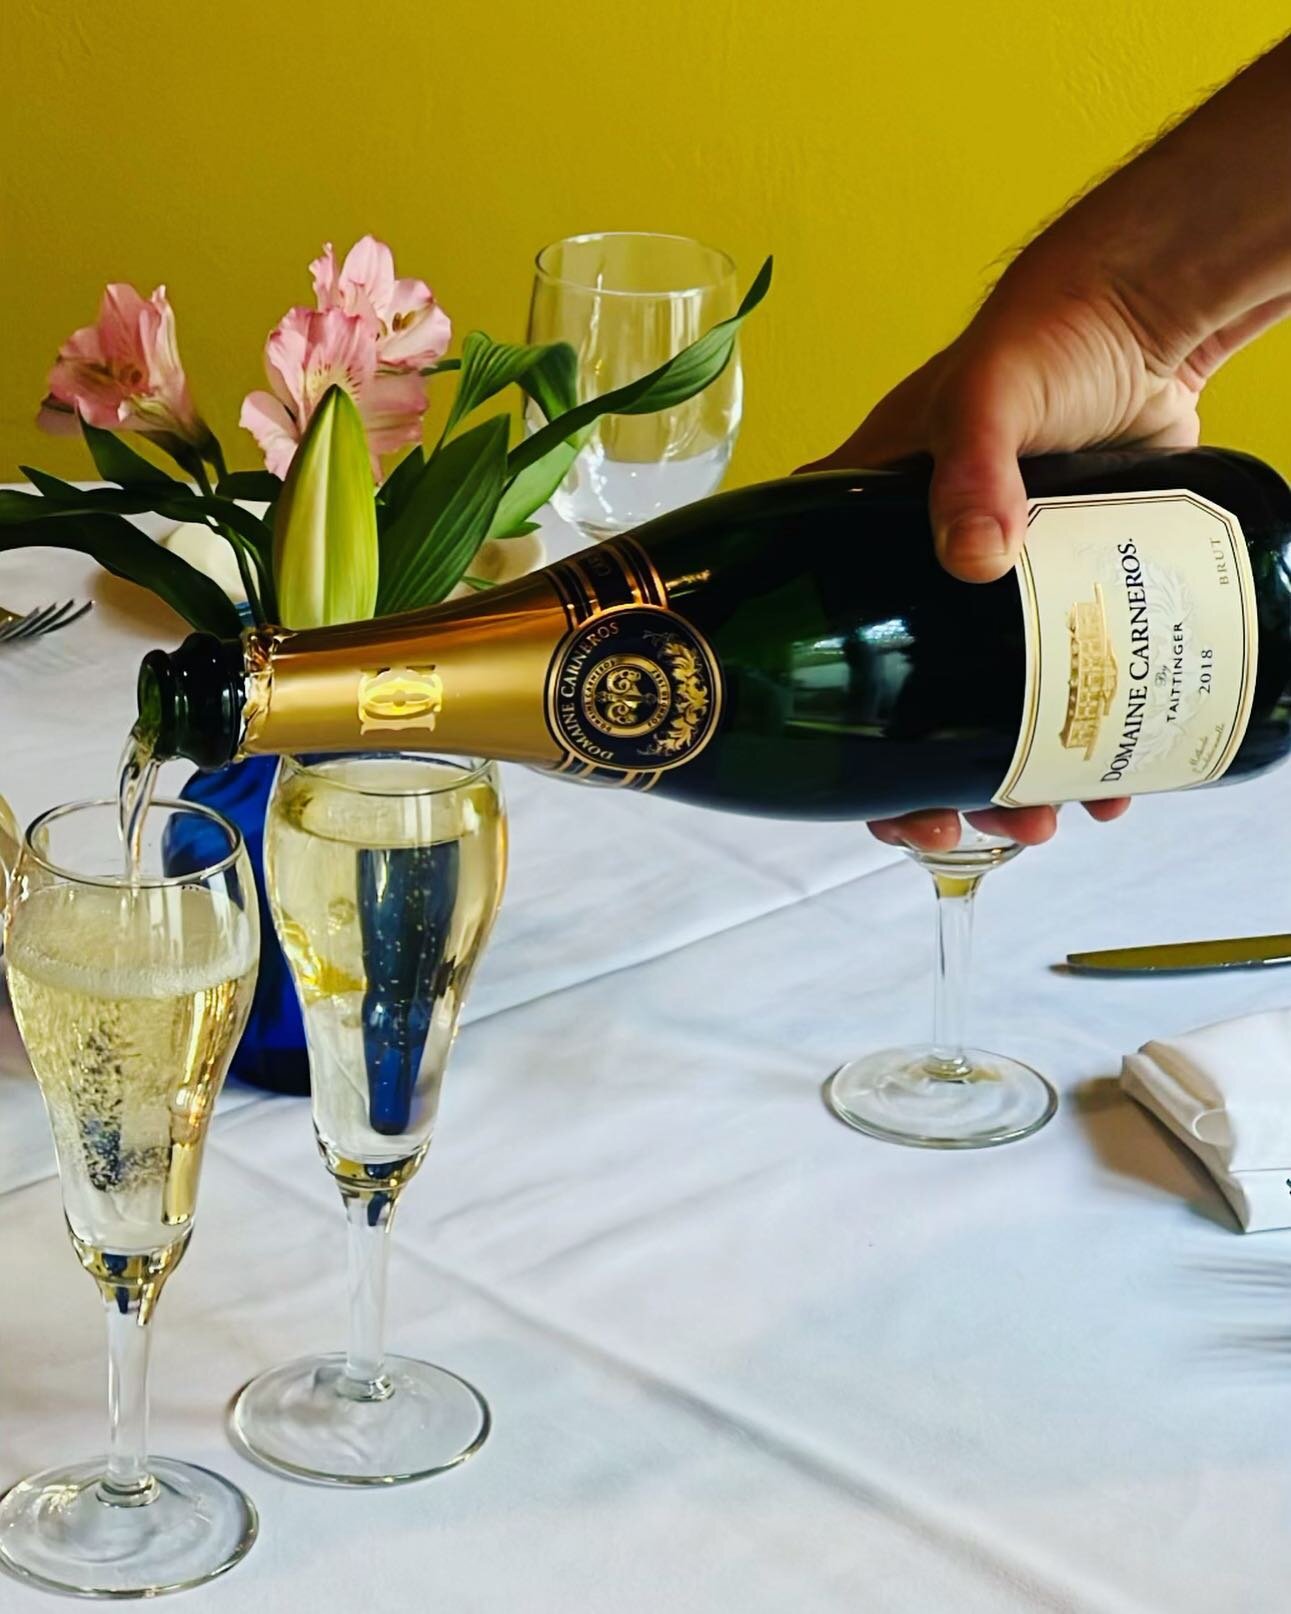 It&rsquo;s time for Champagne! Happy Mother&rsquo;s Day!💐 Reserve now to join us and treat mom to a meal as incredible as she is! 

#backporchcafe_rehoboth #happymothersday #rehoboth #visitrehobothdelaware #finedining #brunchrehoboth #domainecarnero